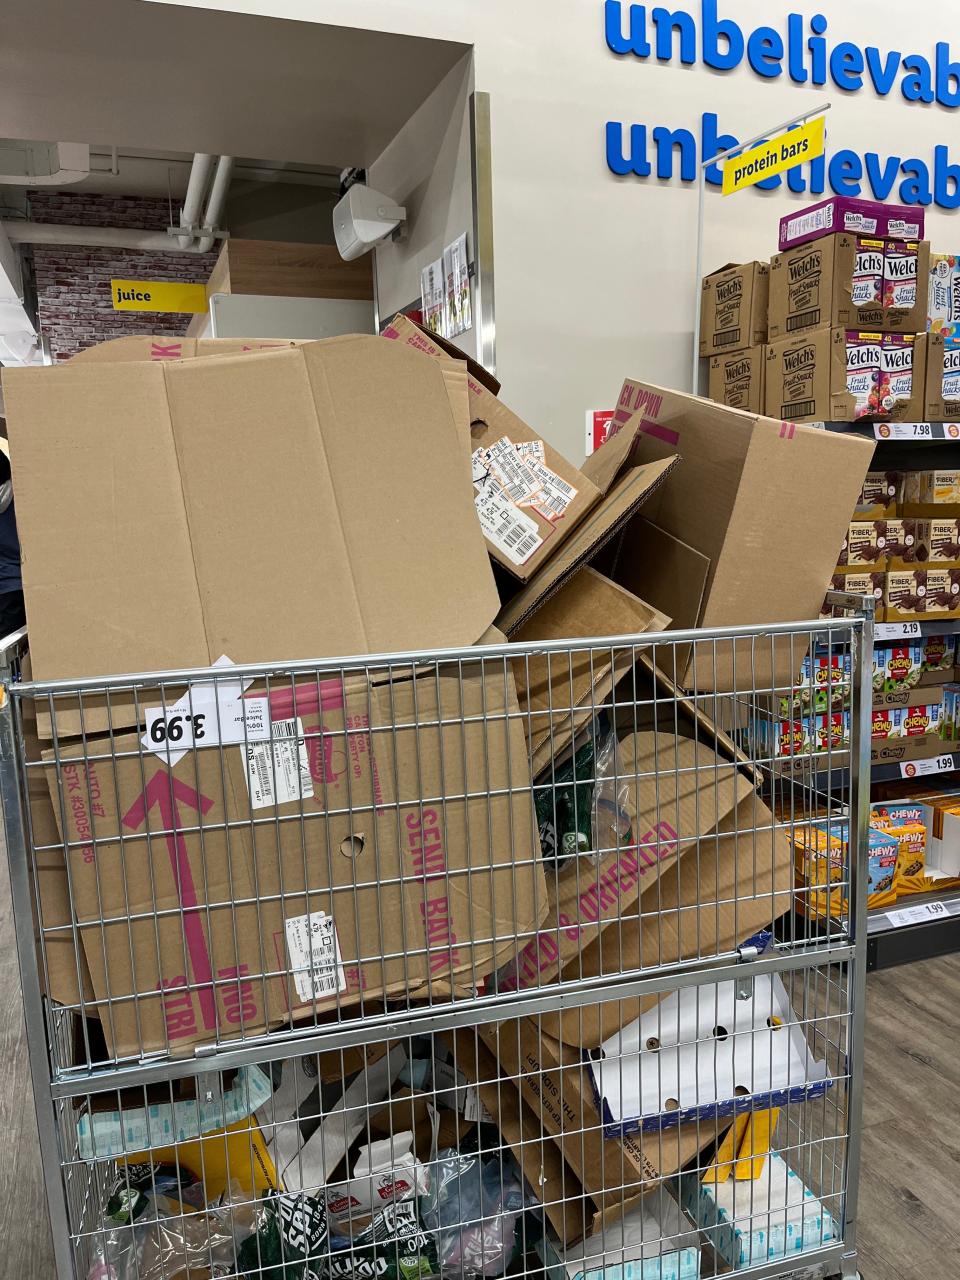 Some empty boxes at Harlem's Lidl.